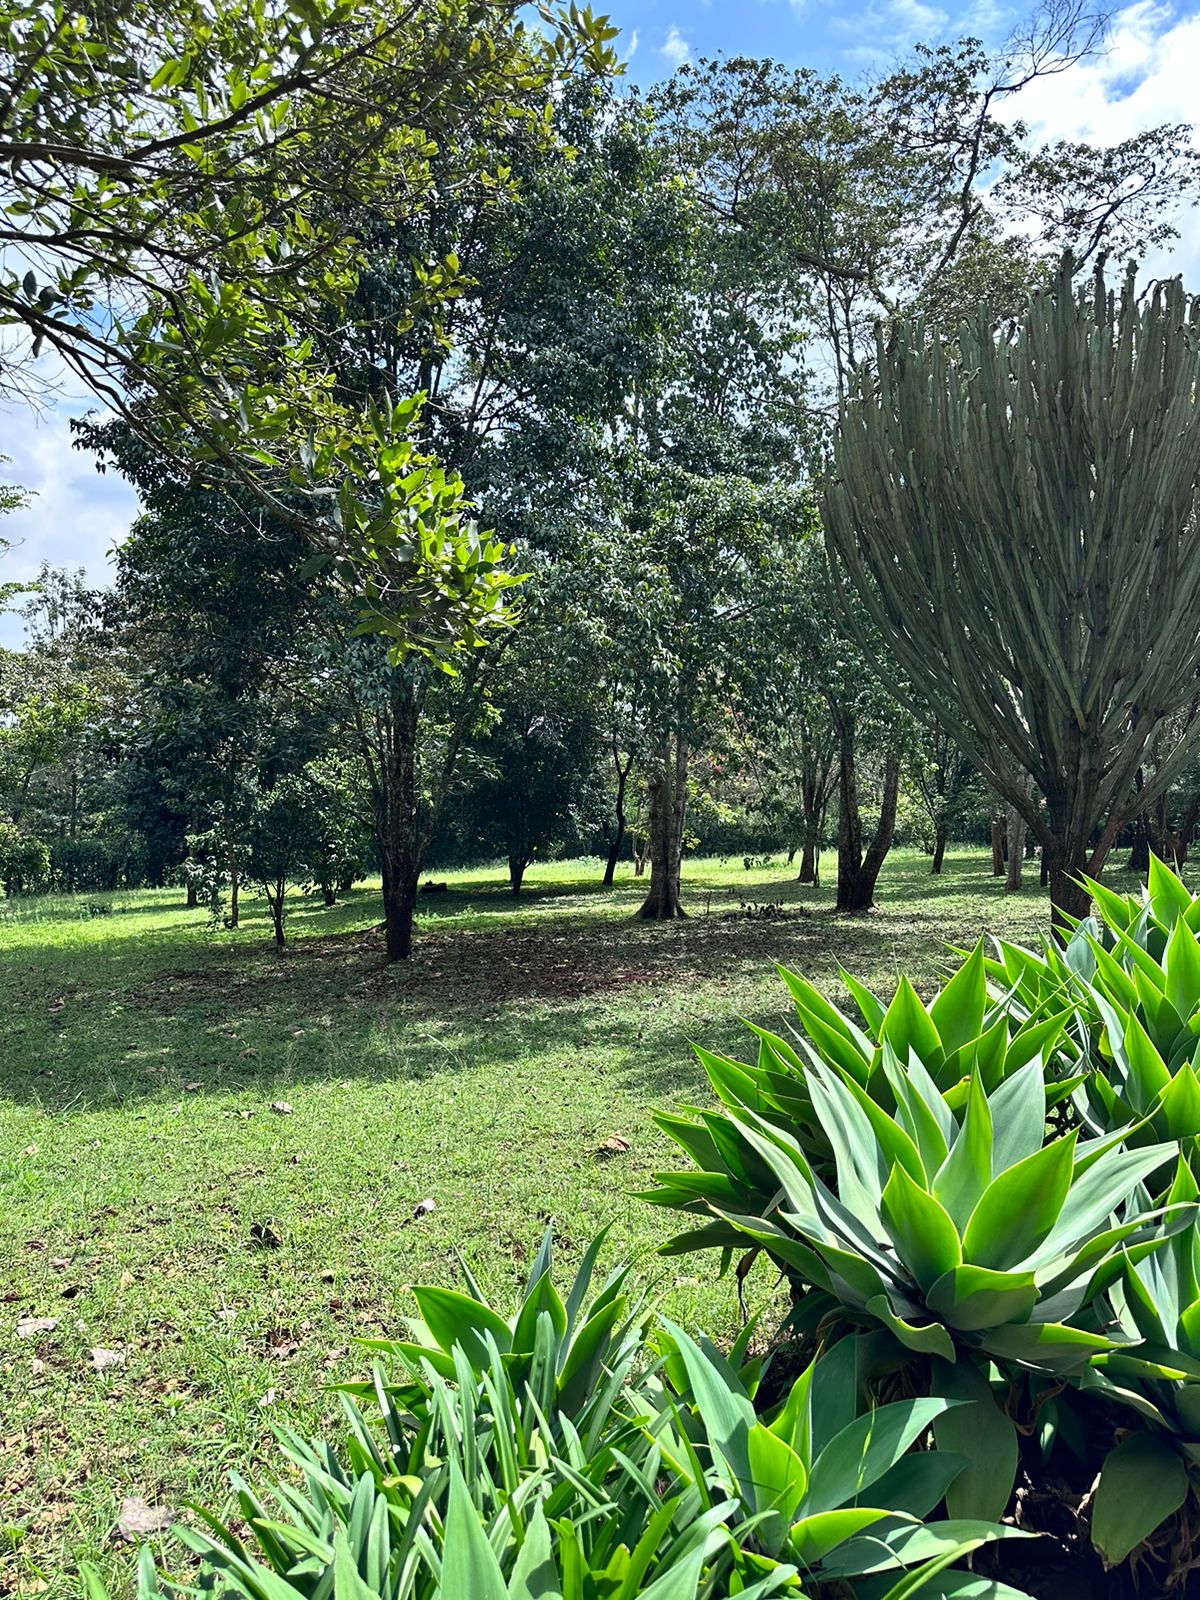 Prime 5 Acres available for sale in Karen. Price : 75 Million per Acre. Close to amenities like the Hub, southern bypass, schools, Karen Golf club. Musilli Homes Pam Golding